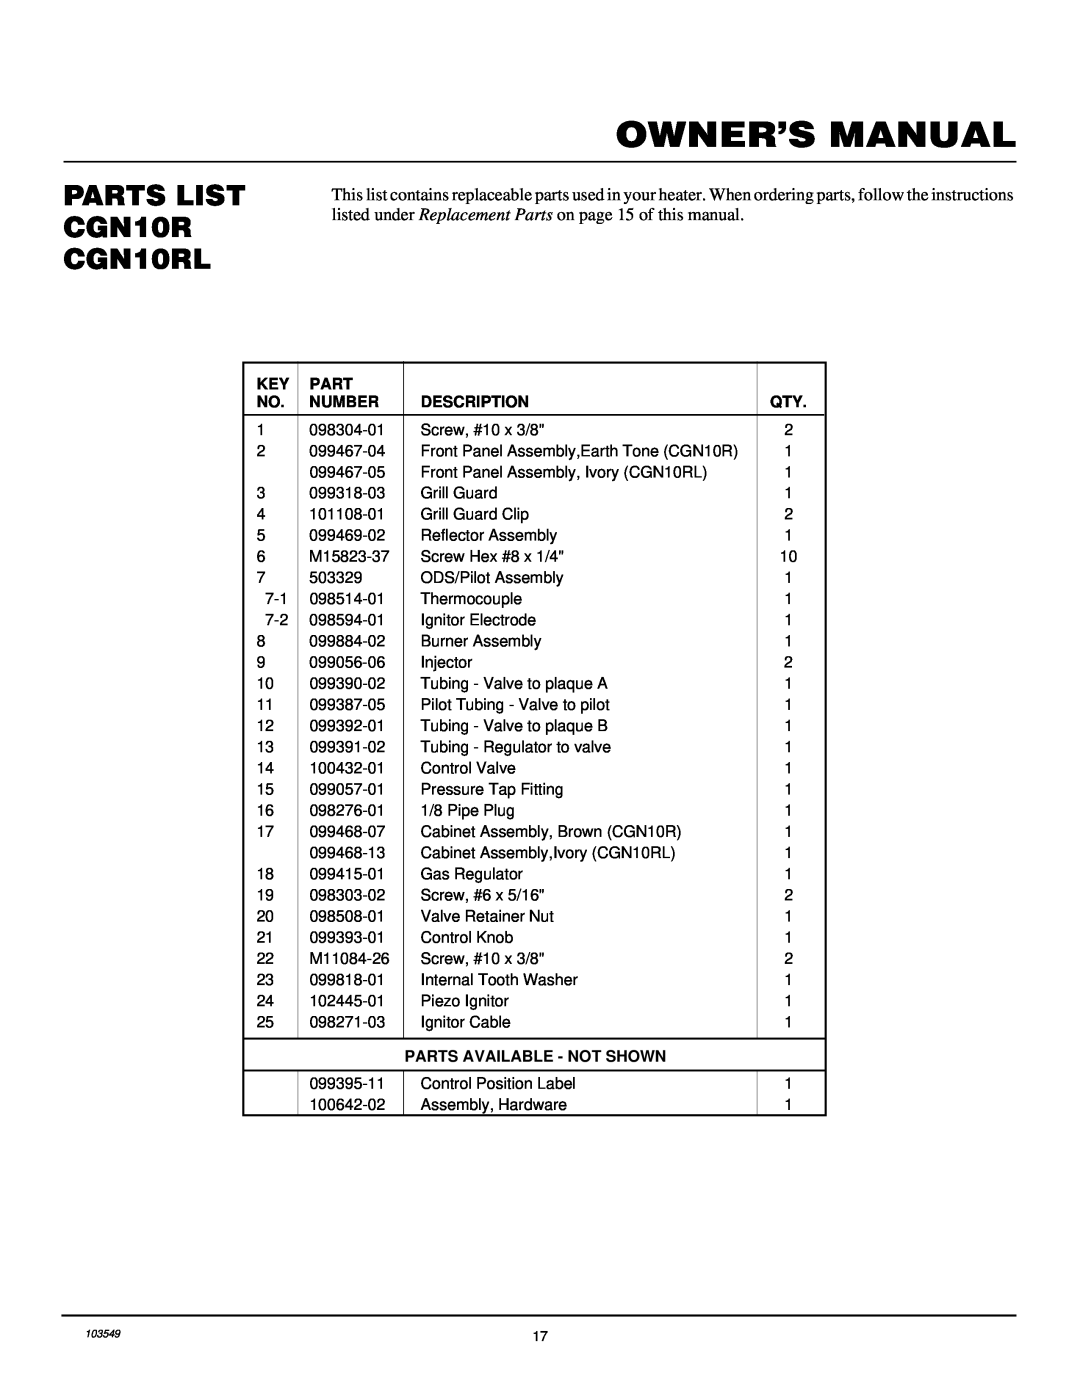 Desa installation manual PARTS LIST CGN10R CGN10RL, Number, Description, Parts Available - Not Shown 